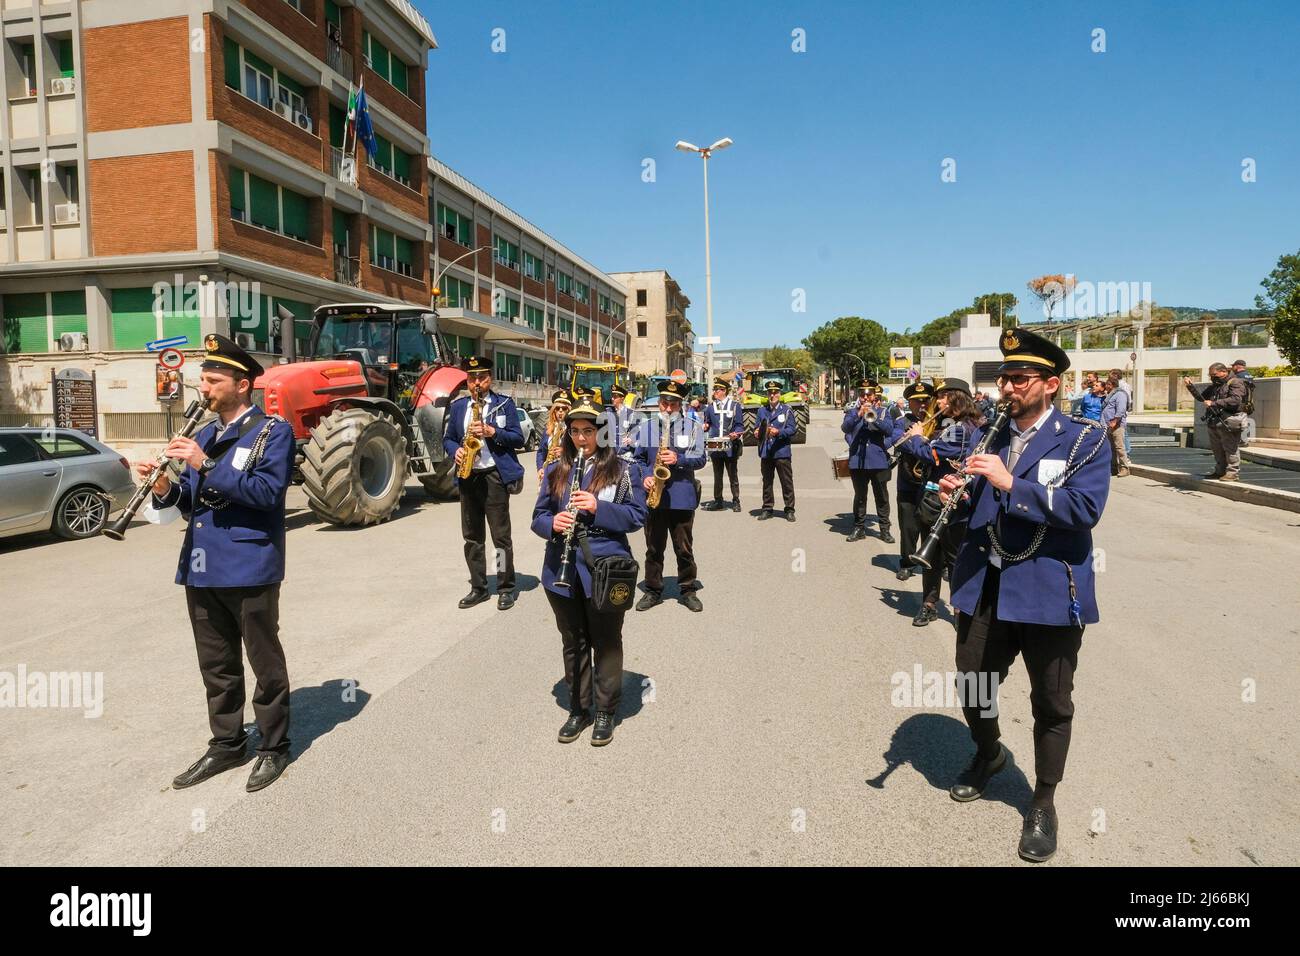 The Coordinamento Unitario in Difesa del Patrimonio Bufalino (United Coordination in Defence of the Bufalino Heritage) staged a funeral procession with tractors, a band and coffin to protest against the slaughter of 140,000 animals since 2014 for allegedly having contracted brucellosis, in front of the local health authority of caserta Stock Photo